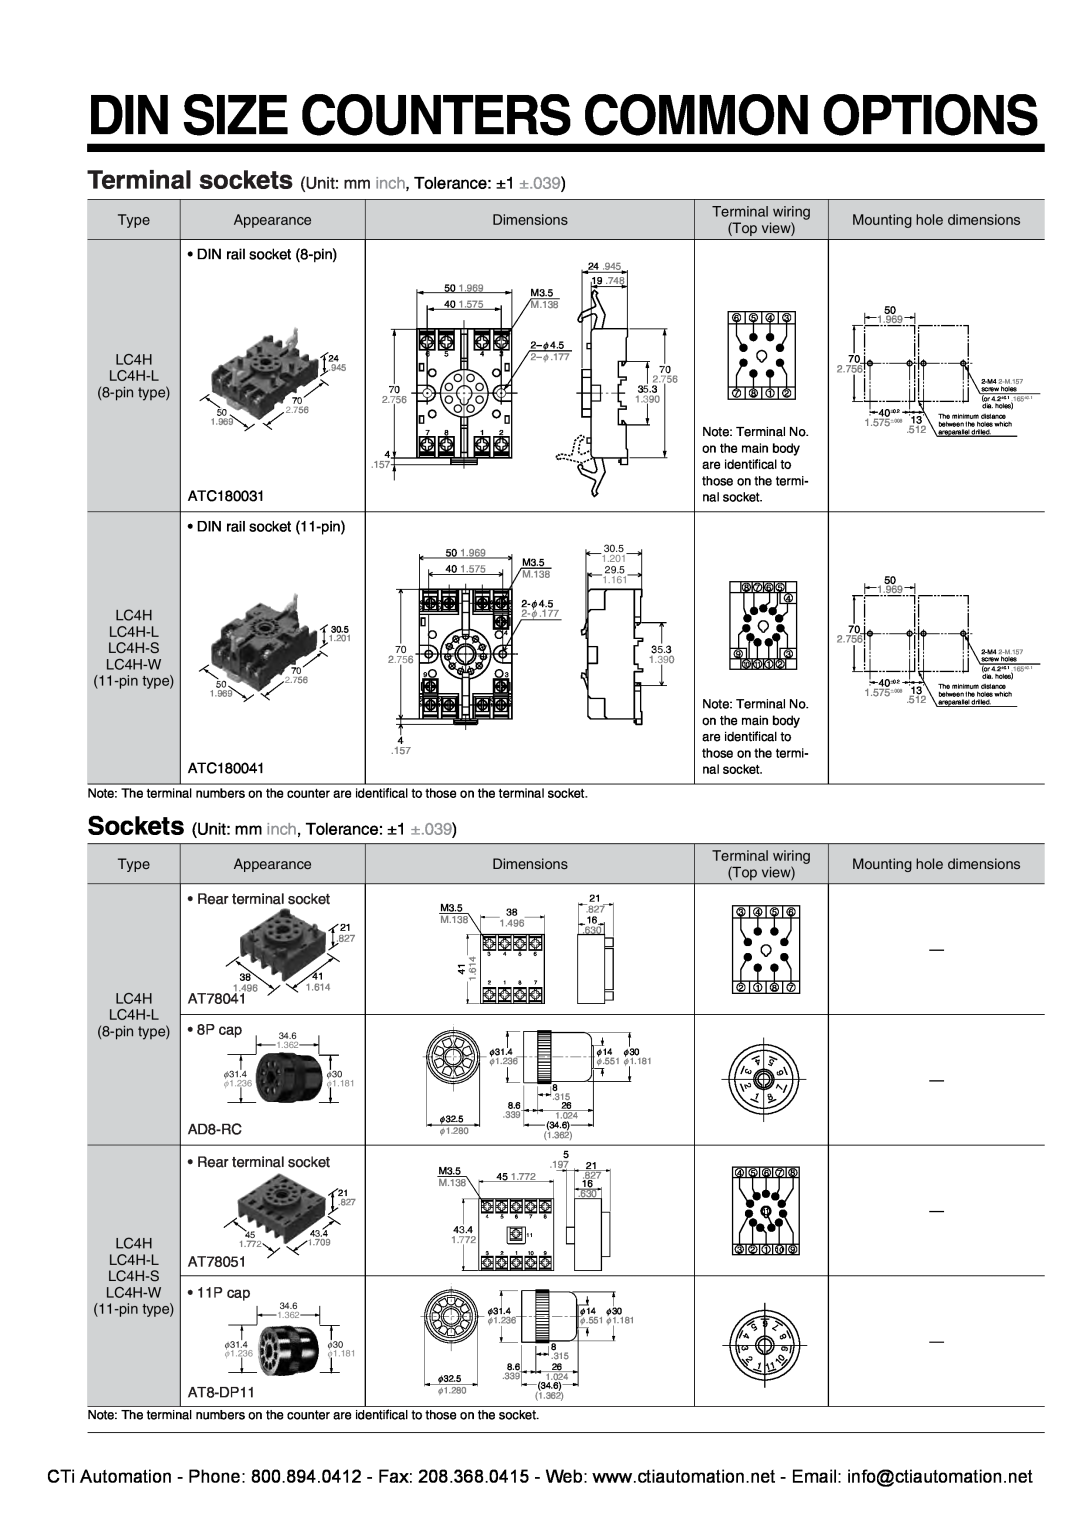 Panasonic LC2H Din Size Counters Common Options, Terminal sockets Unit mm inch, Tolerance ±1 ±.039, Rear terminal socket 